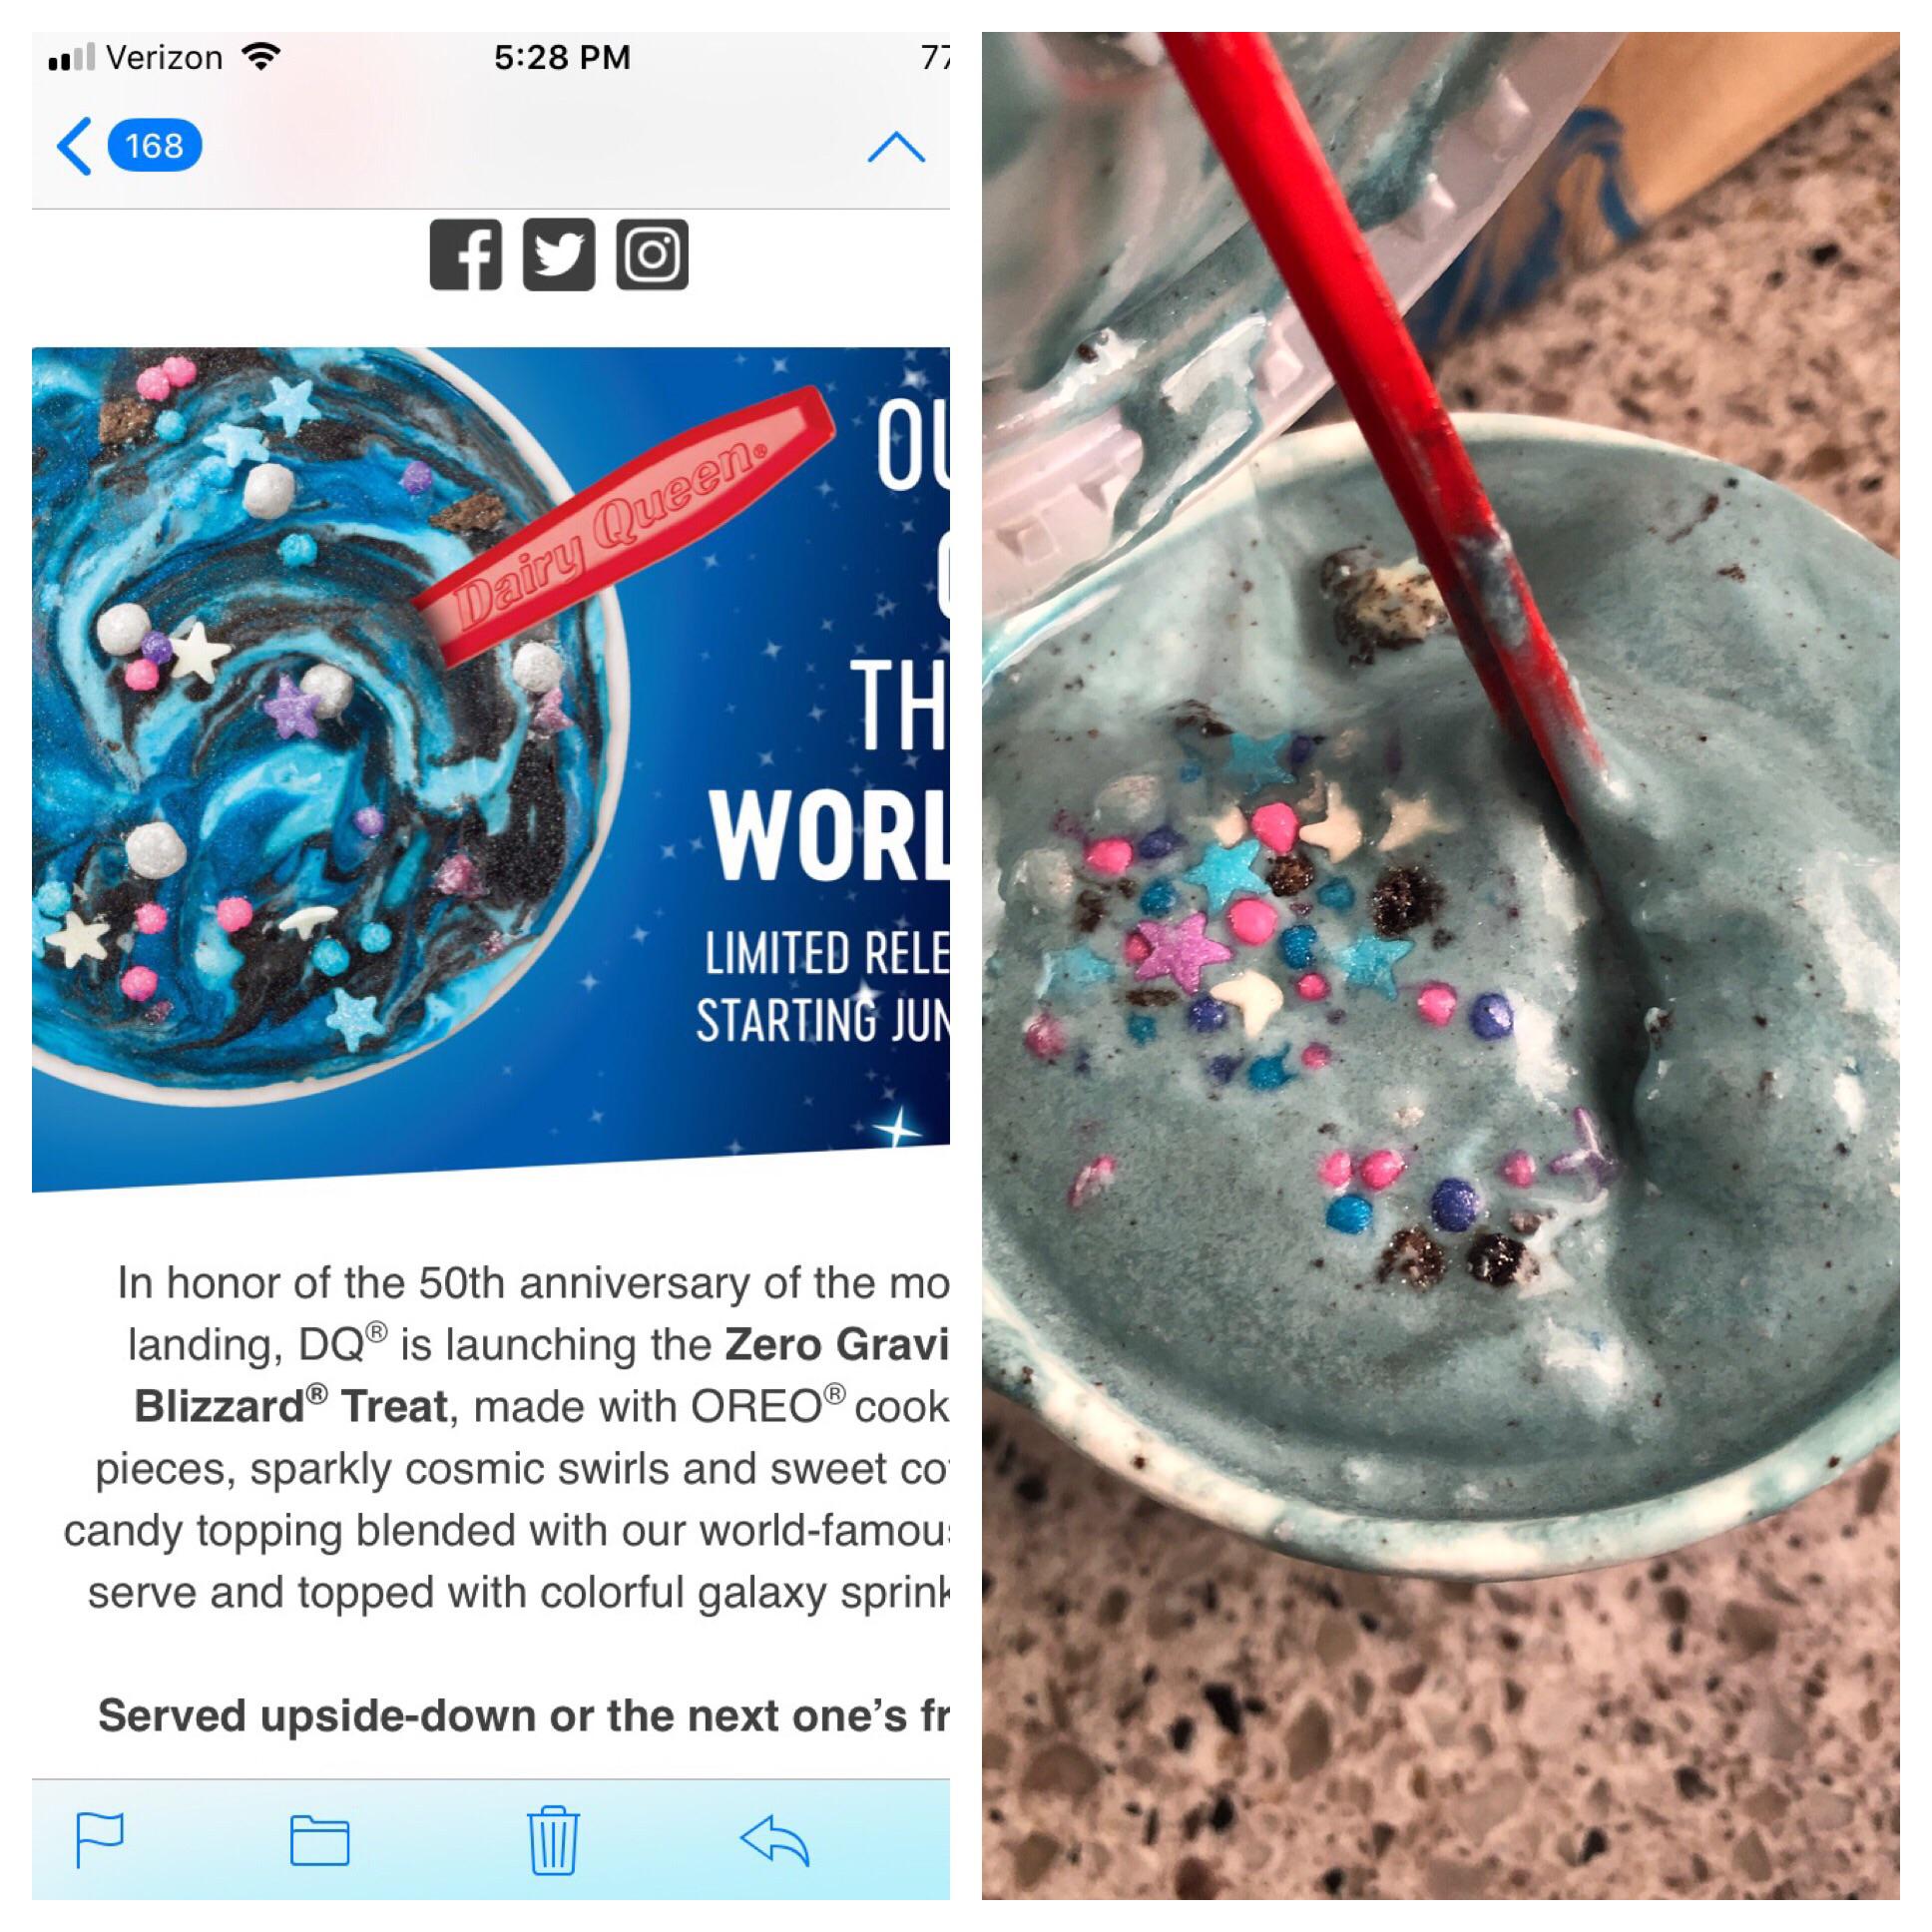 Expectation vs. Reality - Dairy Queen. In honor of the 50th anniversary of the moon landing, Dq is launching the Zero Gravity Blizzard Treat, made with Oreo cookie pieces, sparkly cosmic swirls and sweet candy topping blended